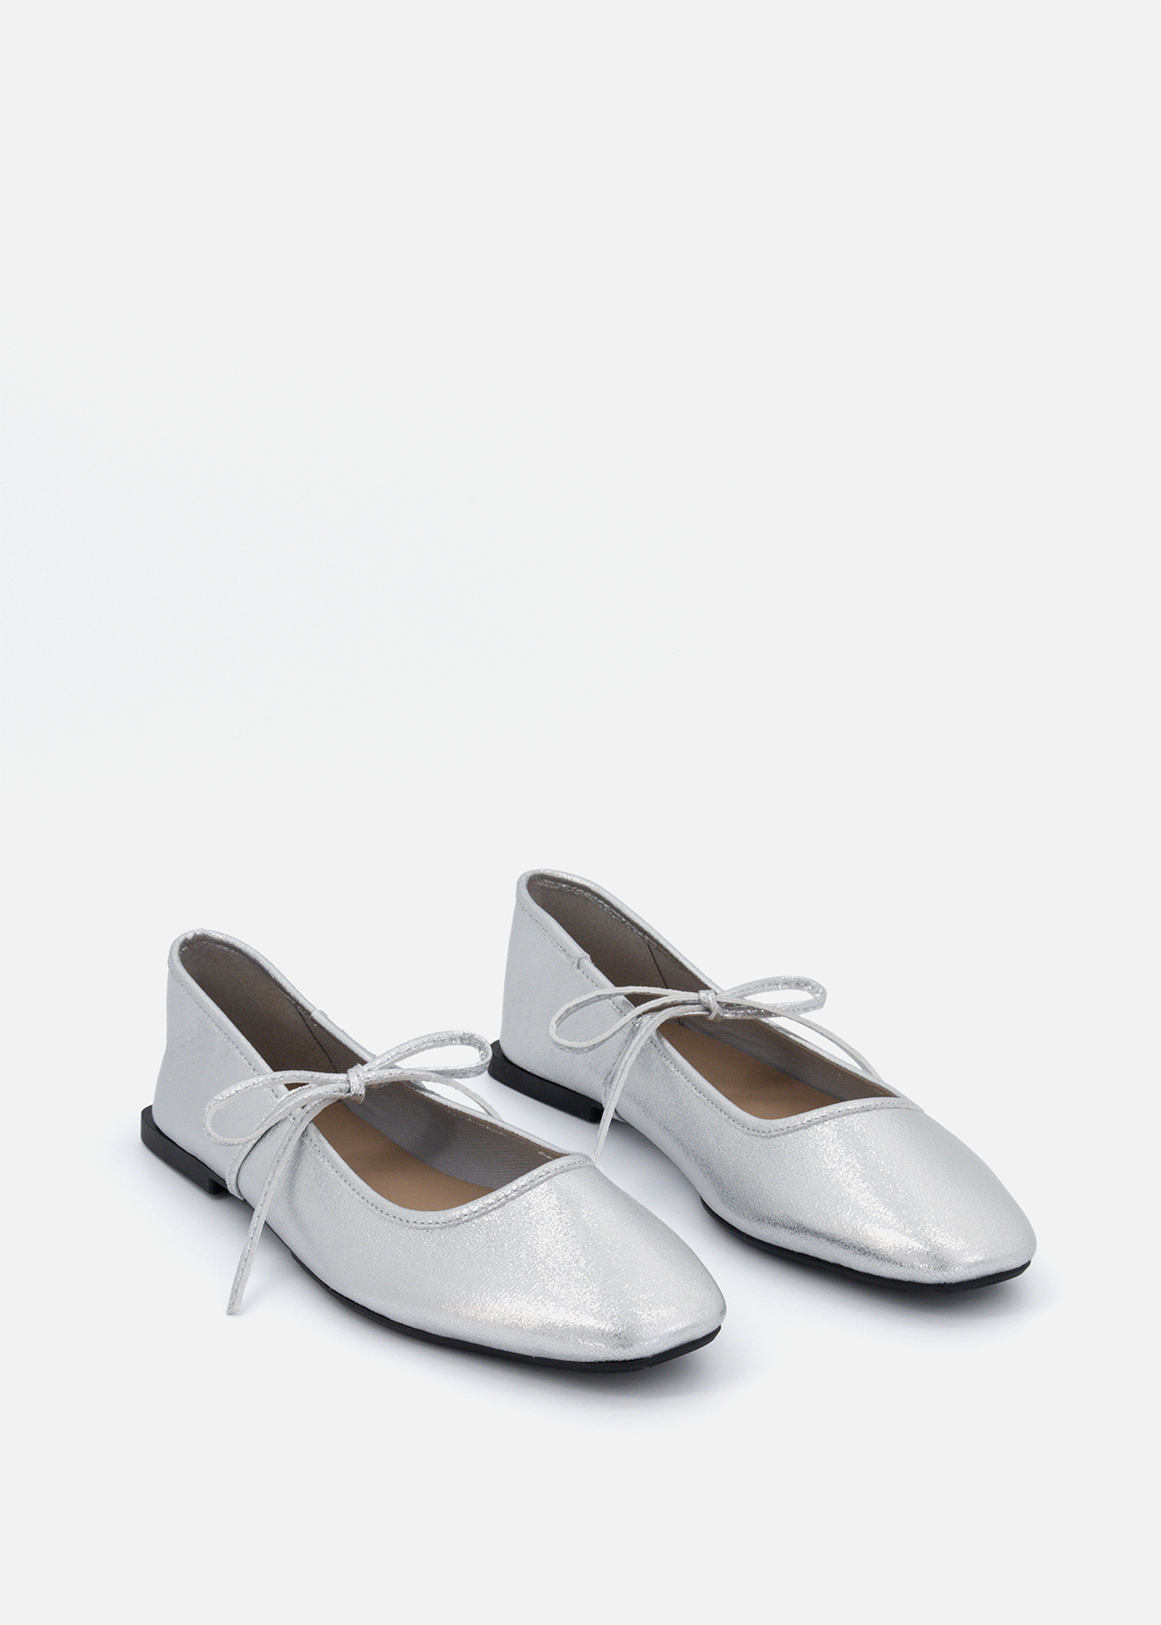 Tie-up Mary Jane Pumps | Woolworths.co.za